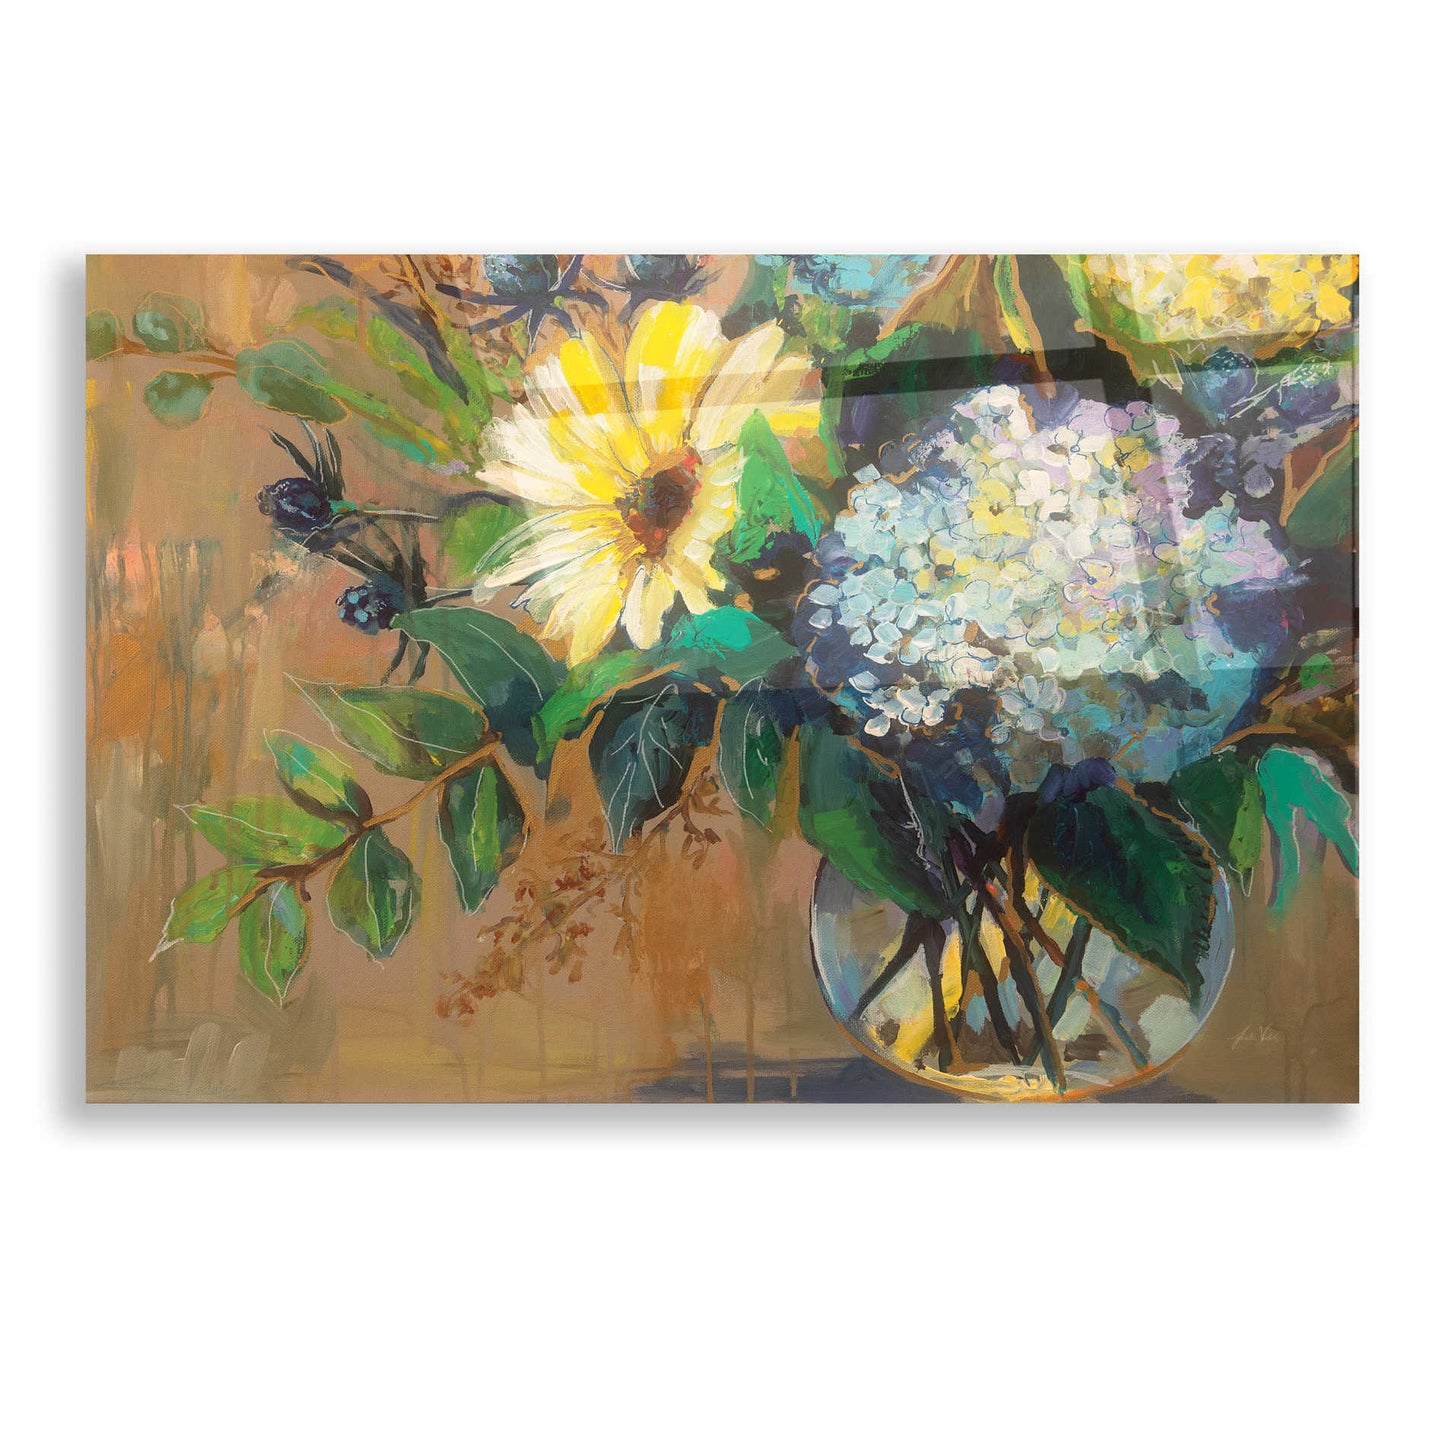 Epic Art 'Glass Floral' by Jeanette Vertentes, Acrylic Glass Wall Art,16x12